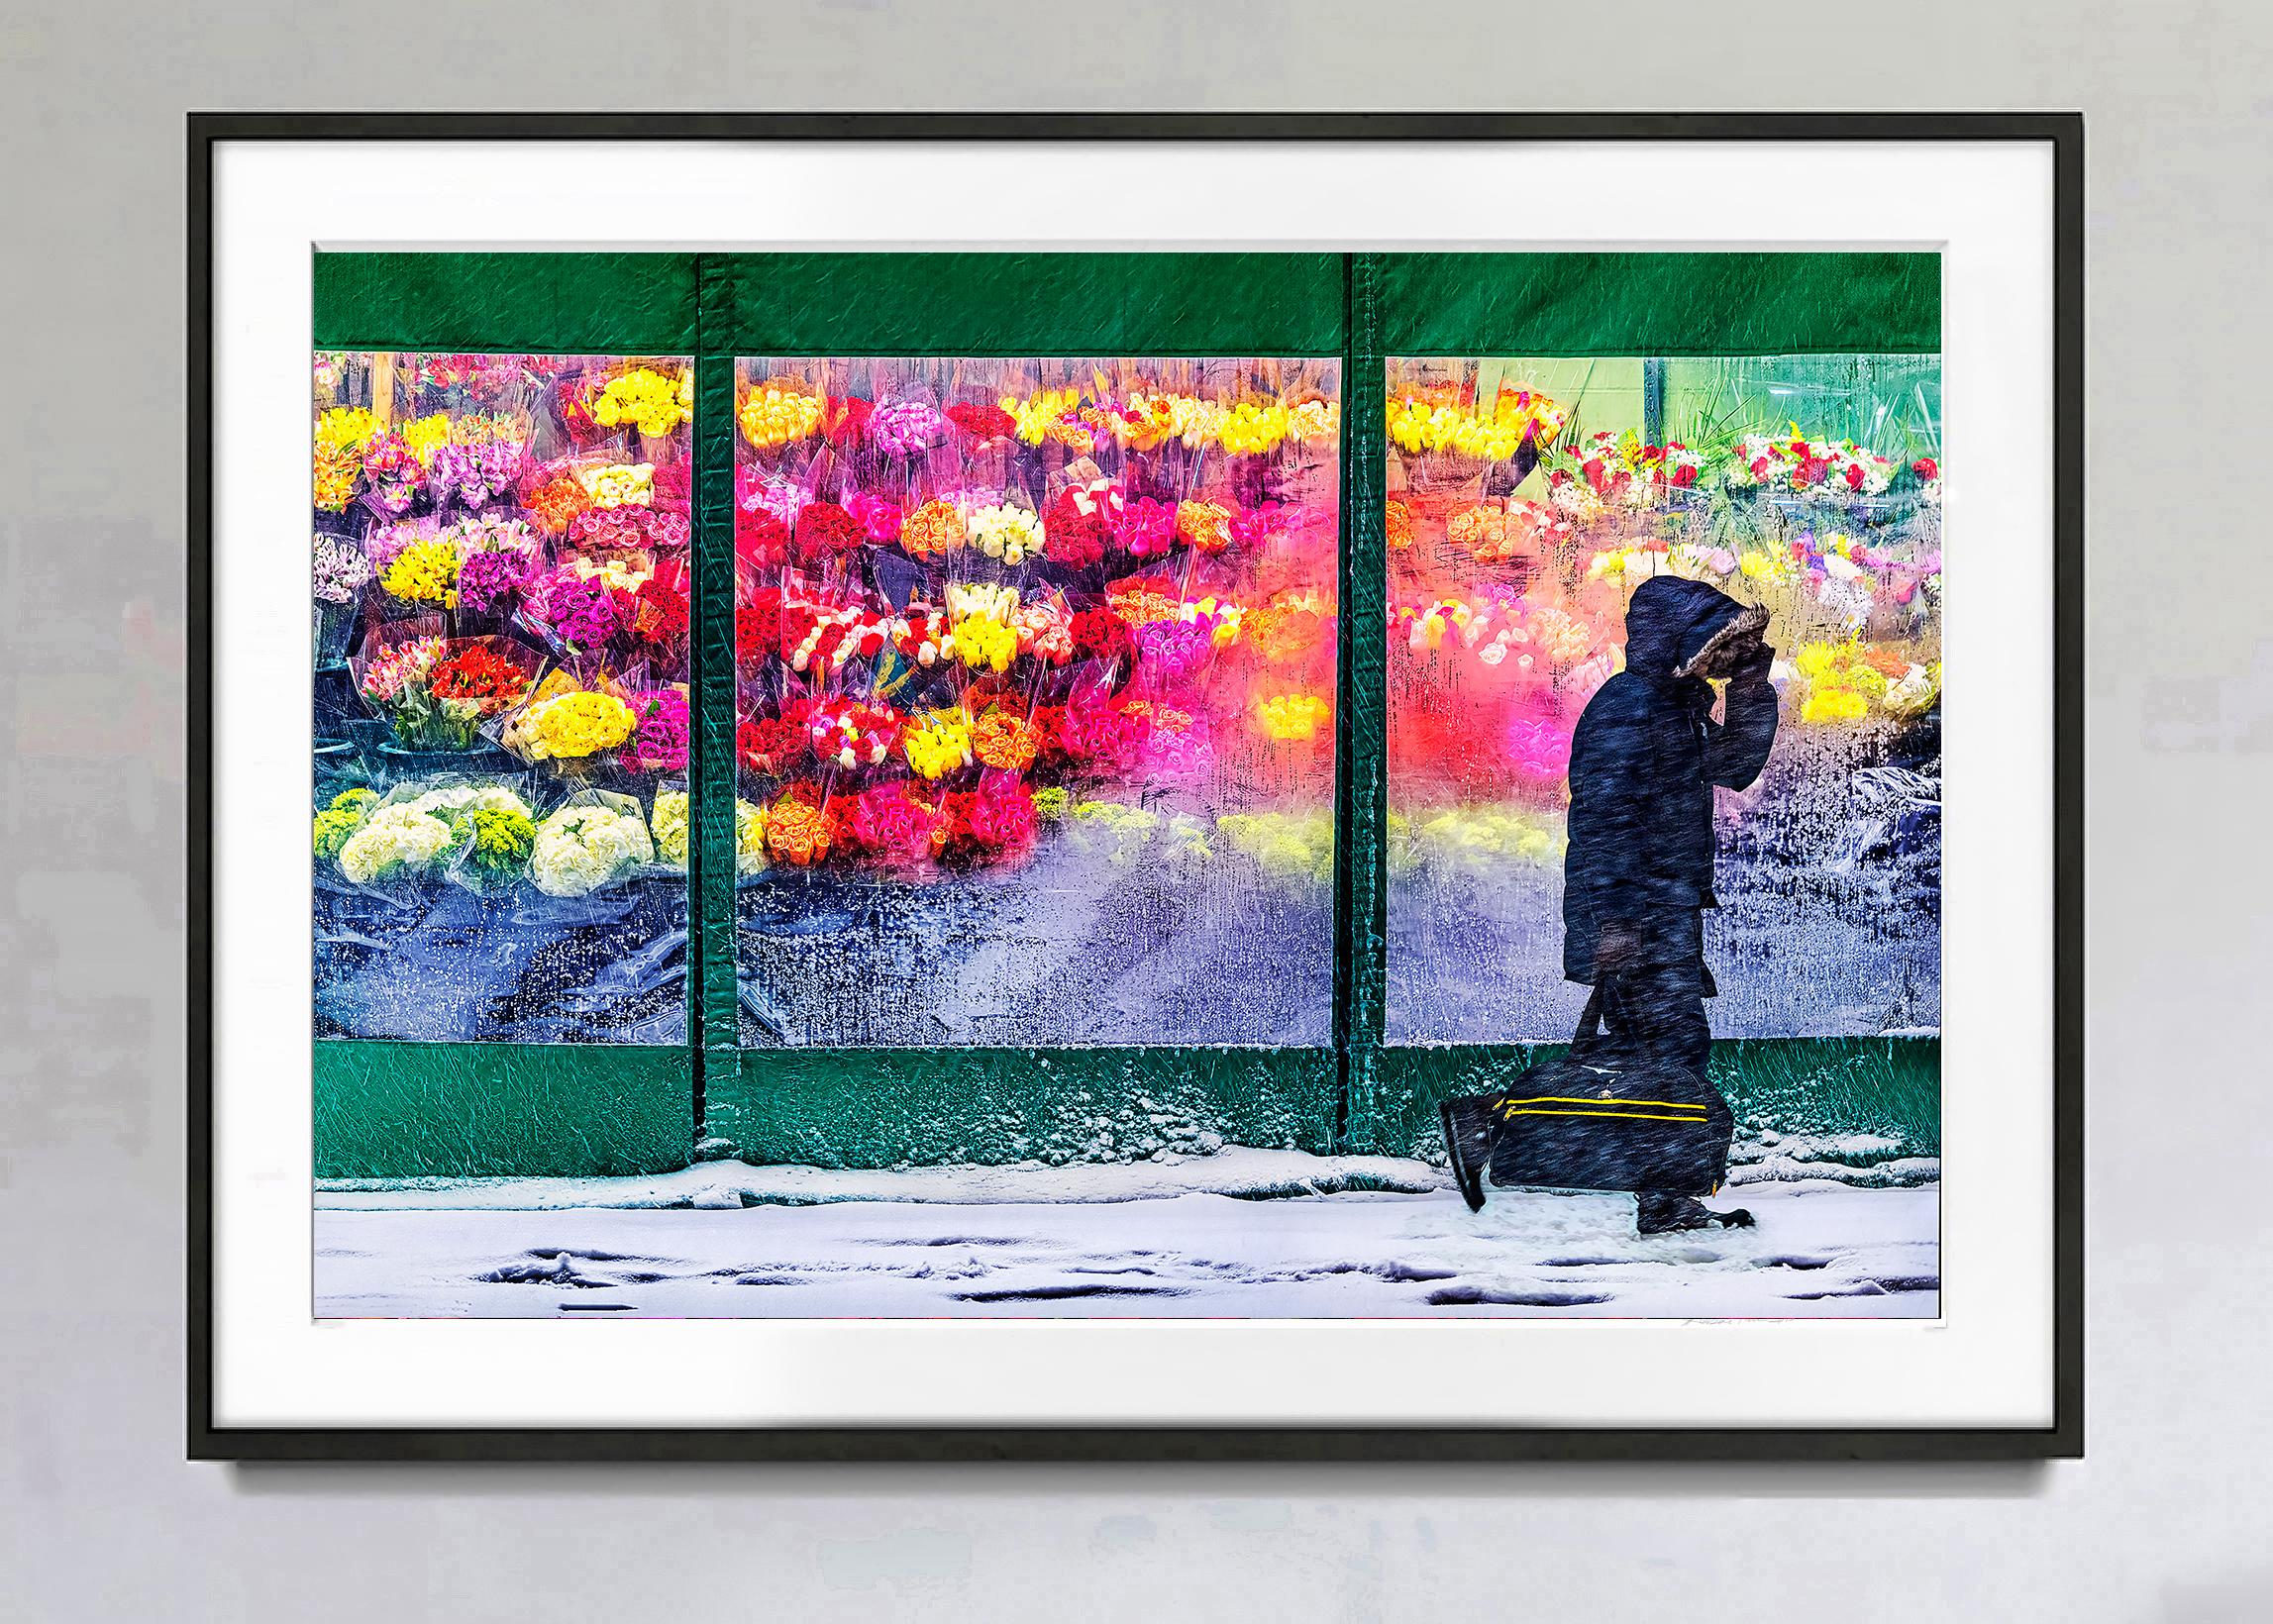 Flowers Melt Snowy New York - Joyful Red Roses on a Blustery Gloomy Day - Post-Impressionist Photograph by Mitchell Funk